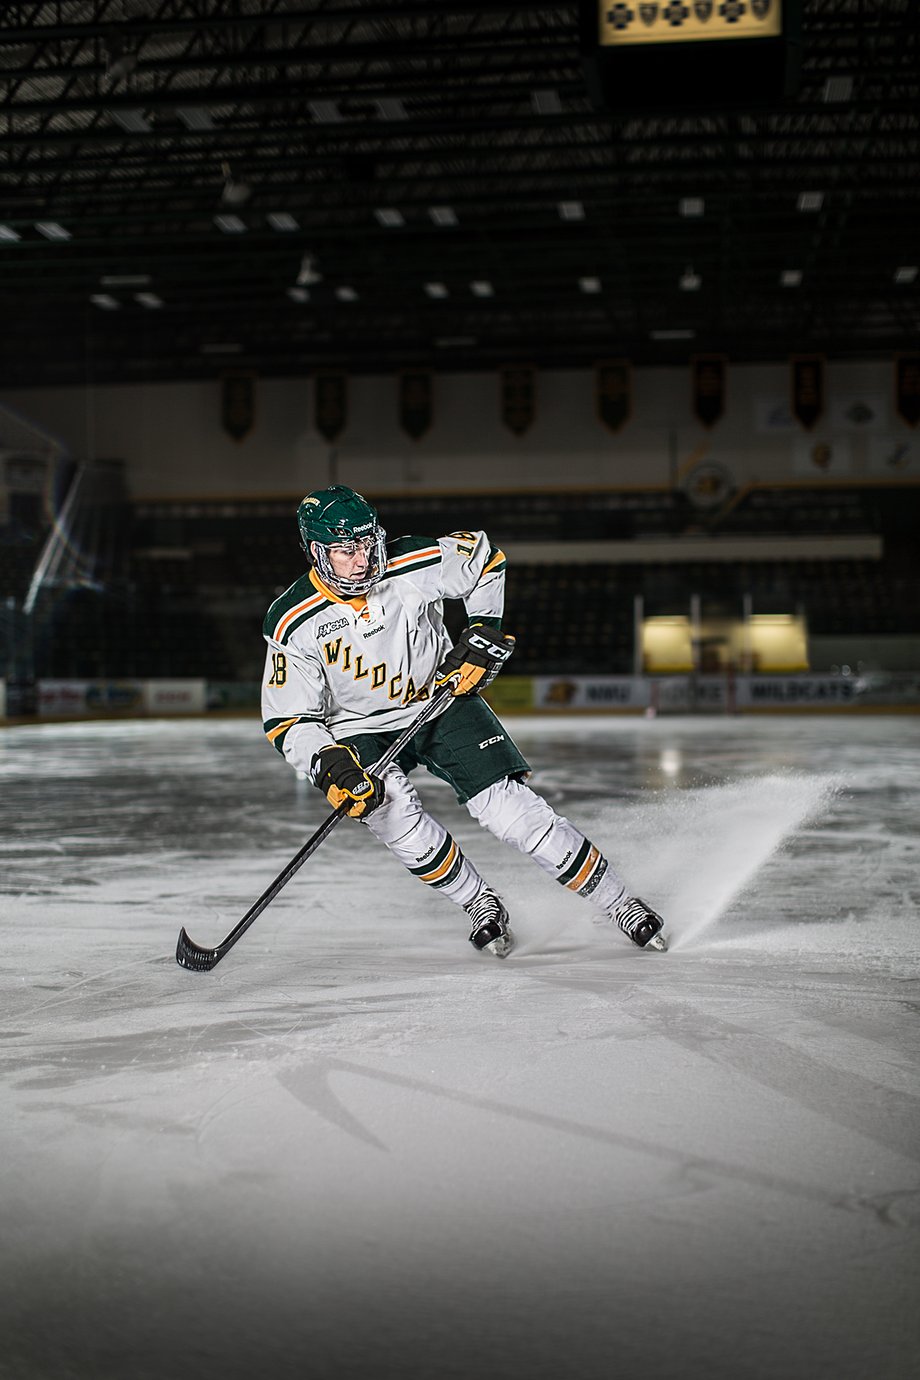 NMU Wildcats hockey player photographed by Josh LeClair